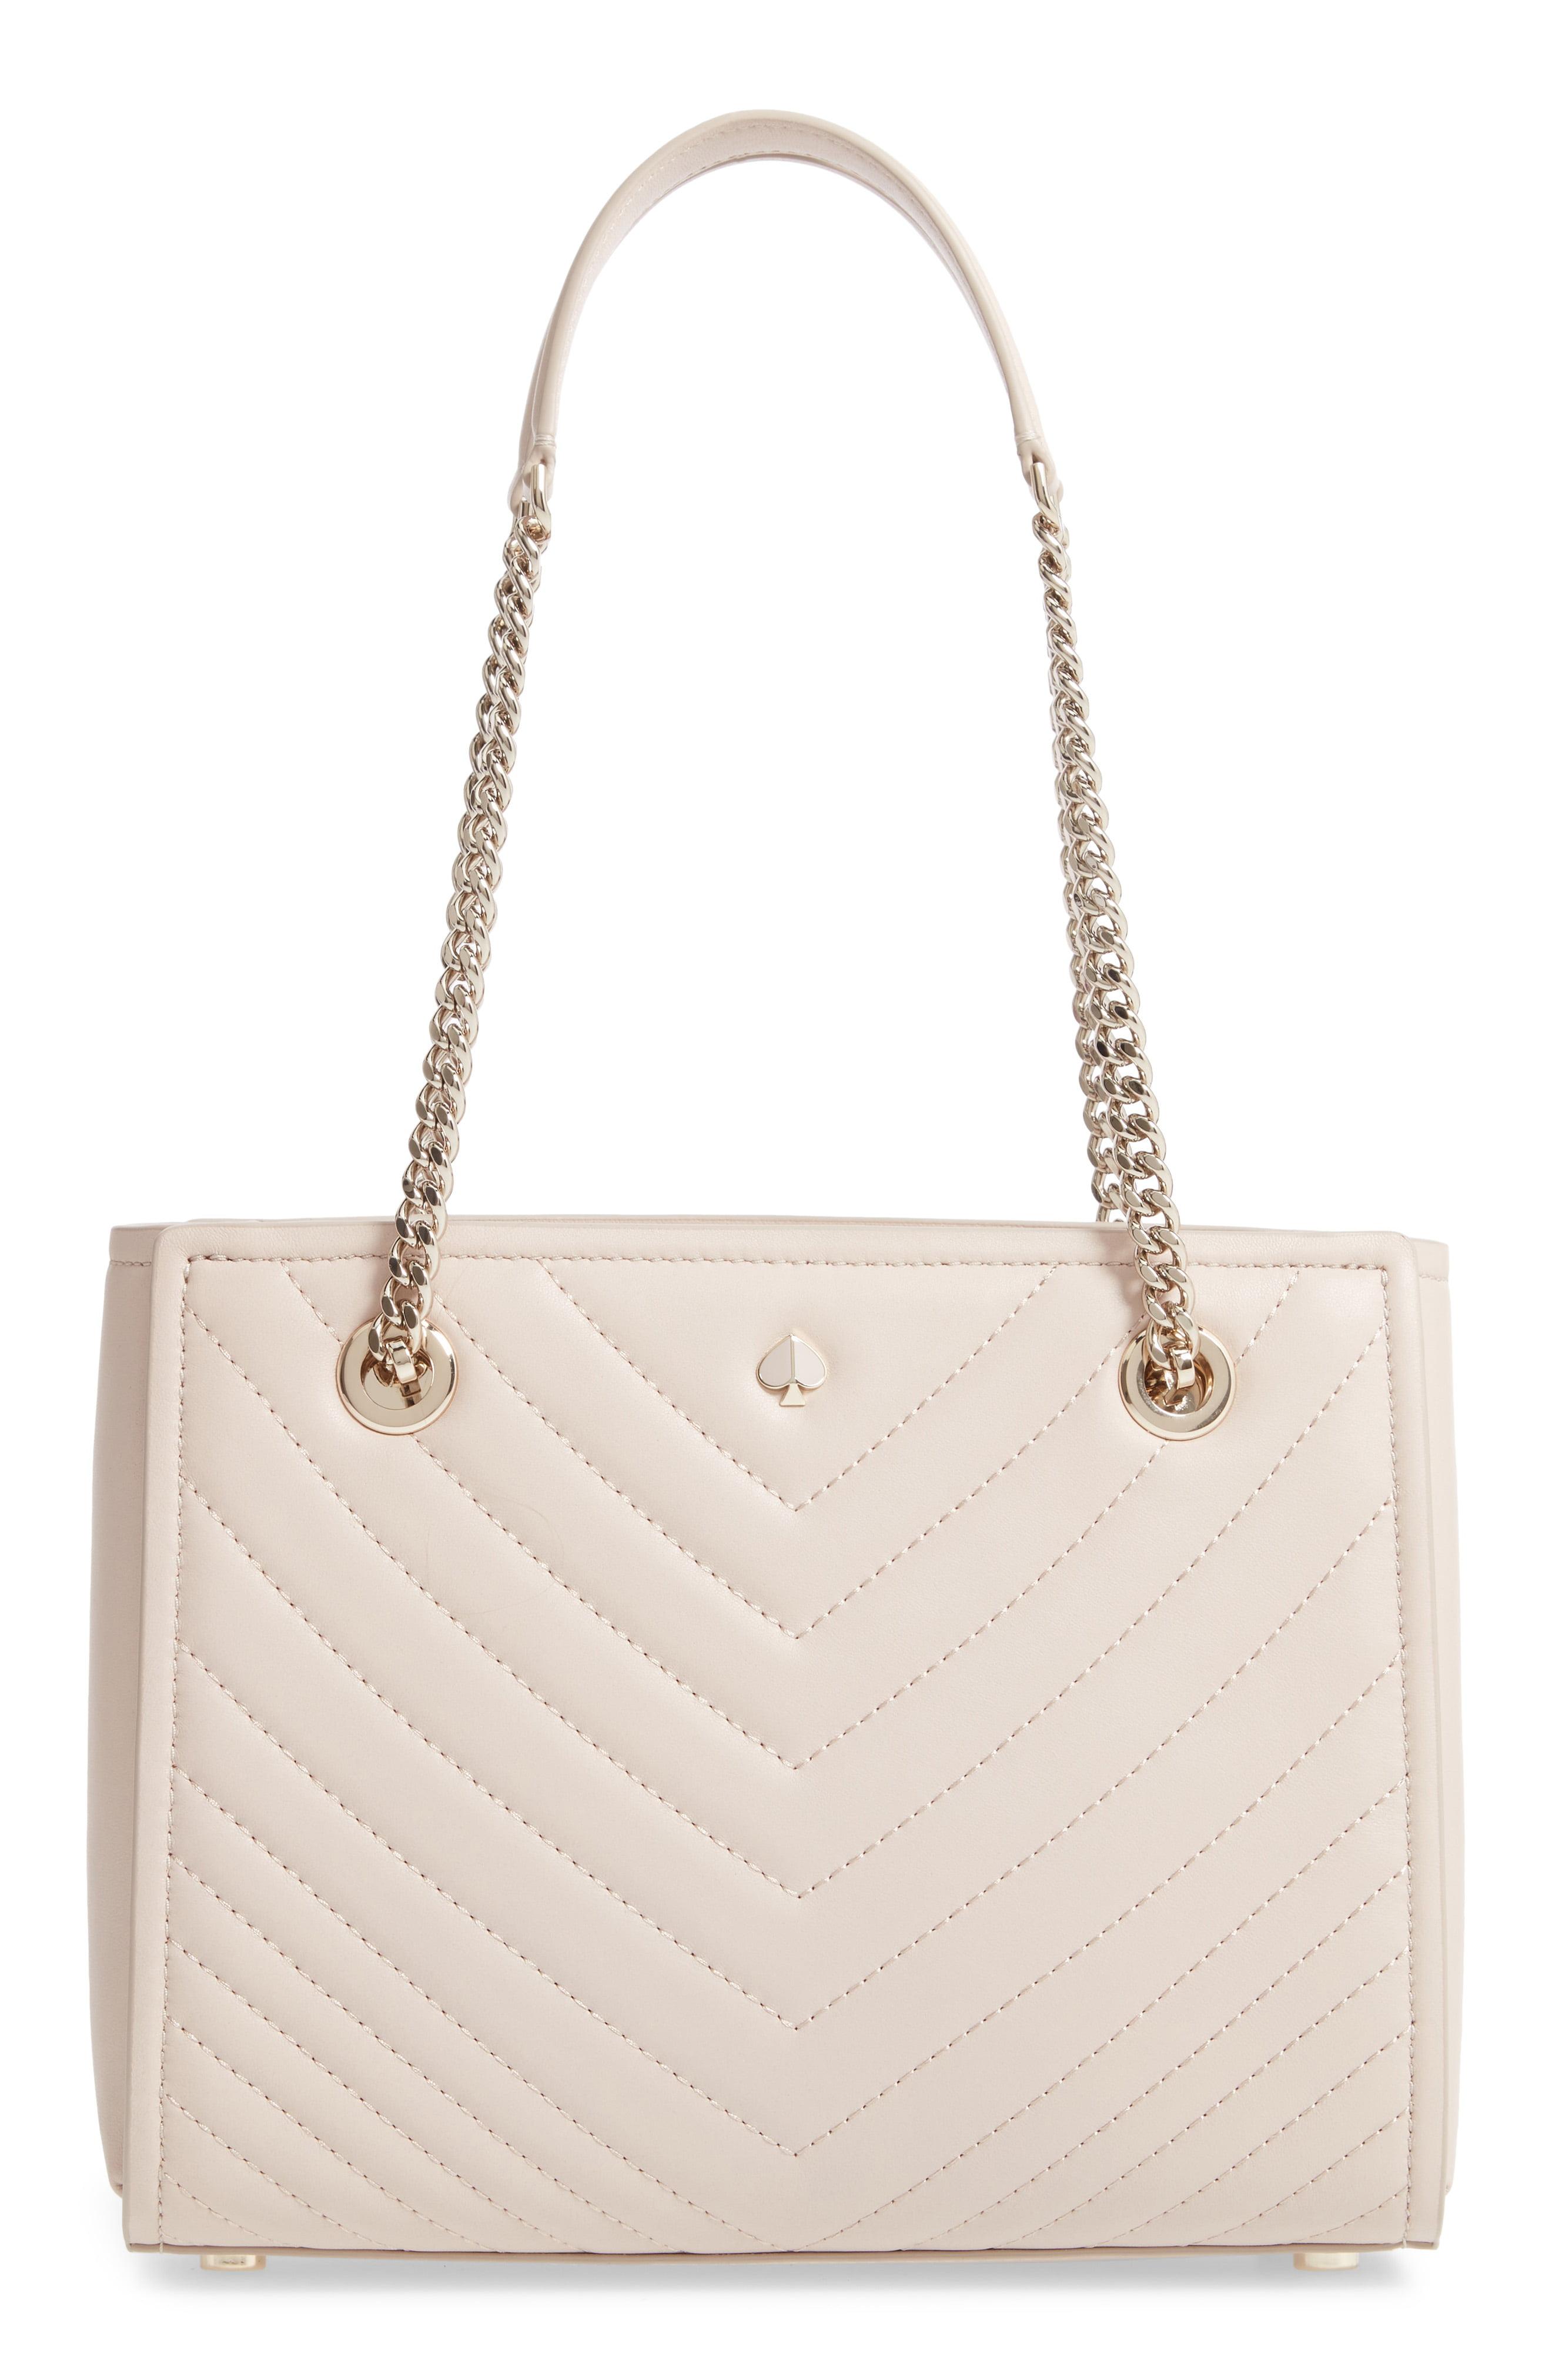 Lyst - Kate Spade Small Amelia Leather Tote in White